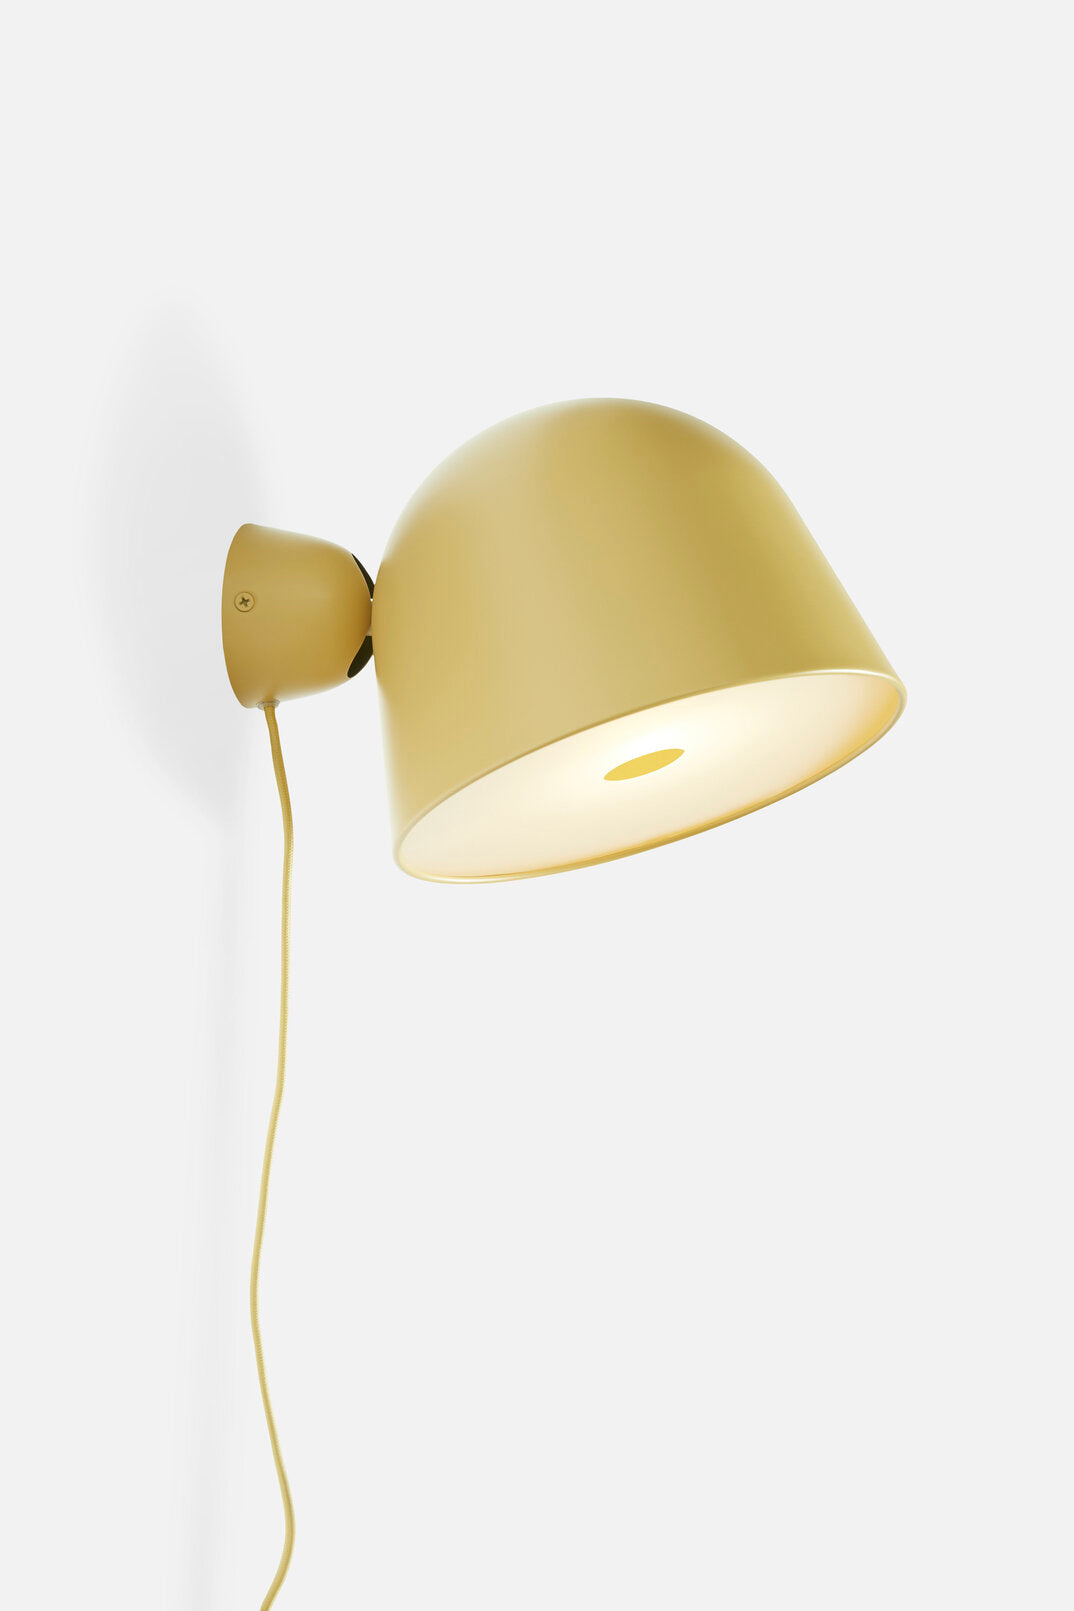 Kuppi Wall Lamp by Woud